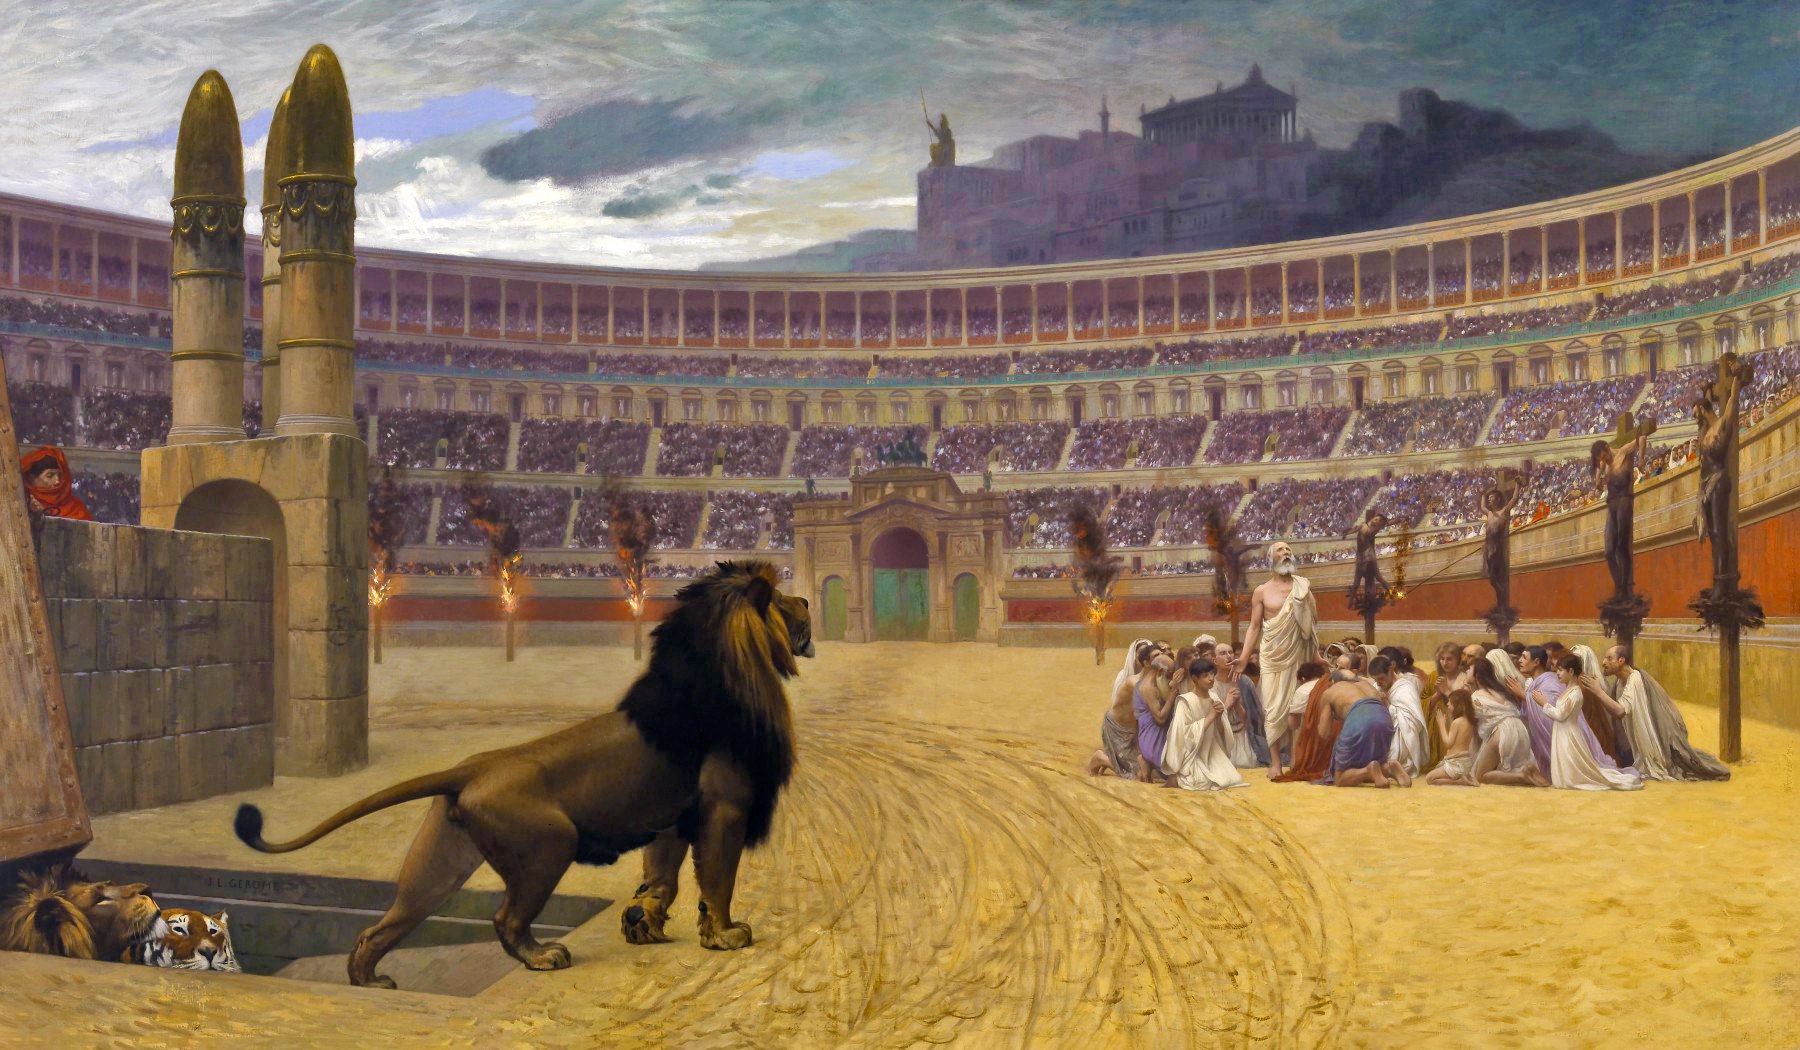 The painting depicts a group of early Christians kneeling in prayer inside what the artist identifies as ancient Rome's Circus Maximus, although elements like the seating more closely resemble the Colosseum. A crowd of Roman spectators watches from the stands. In the background, a hill surmounted by a colossal statue and a temple is visible, resembling the Athenian Acropolis more than Rome's Palatine Hill. The Christians display a sense of calm and religious fortitude as they face impending martyrdom, either through being devoured by wild beasts or set ablaze. Despite its historical inaccuracies, the painting is admired for its dramatic impact and emotional intensity.